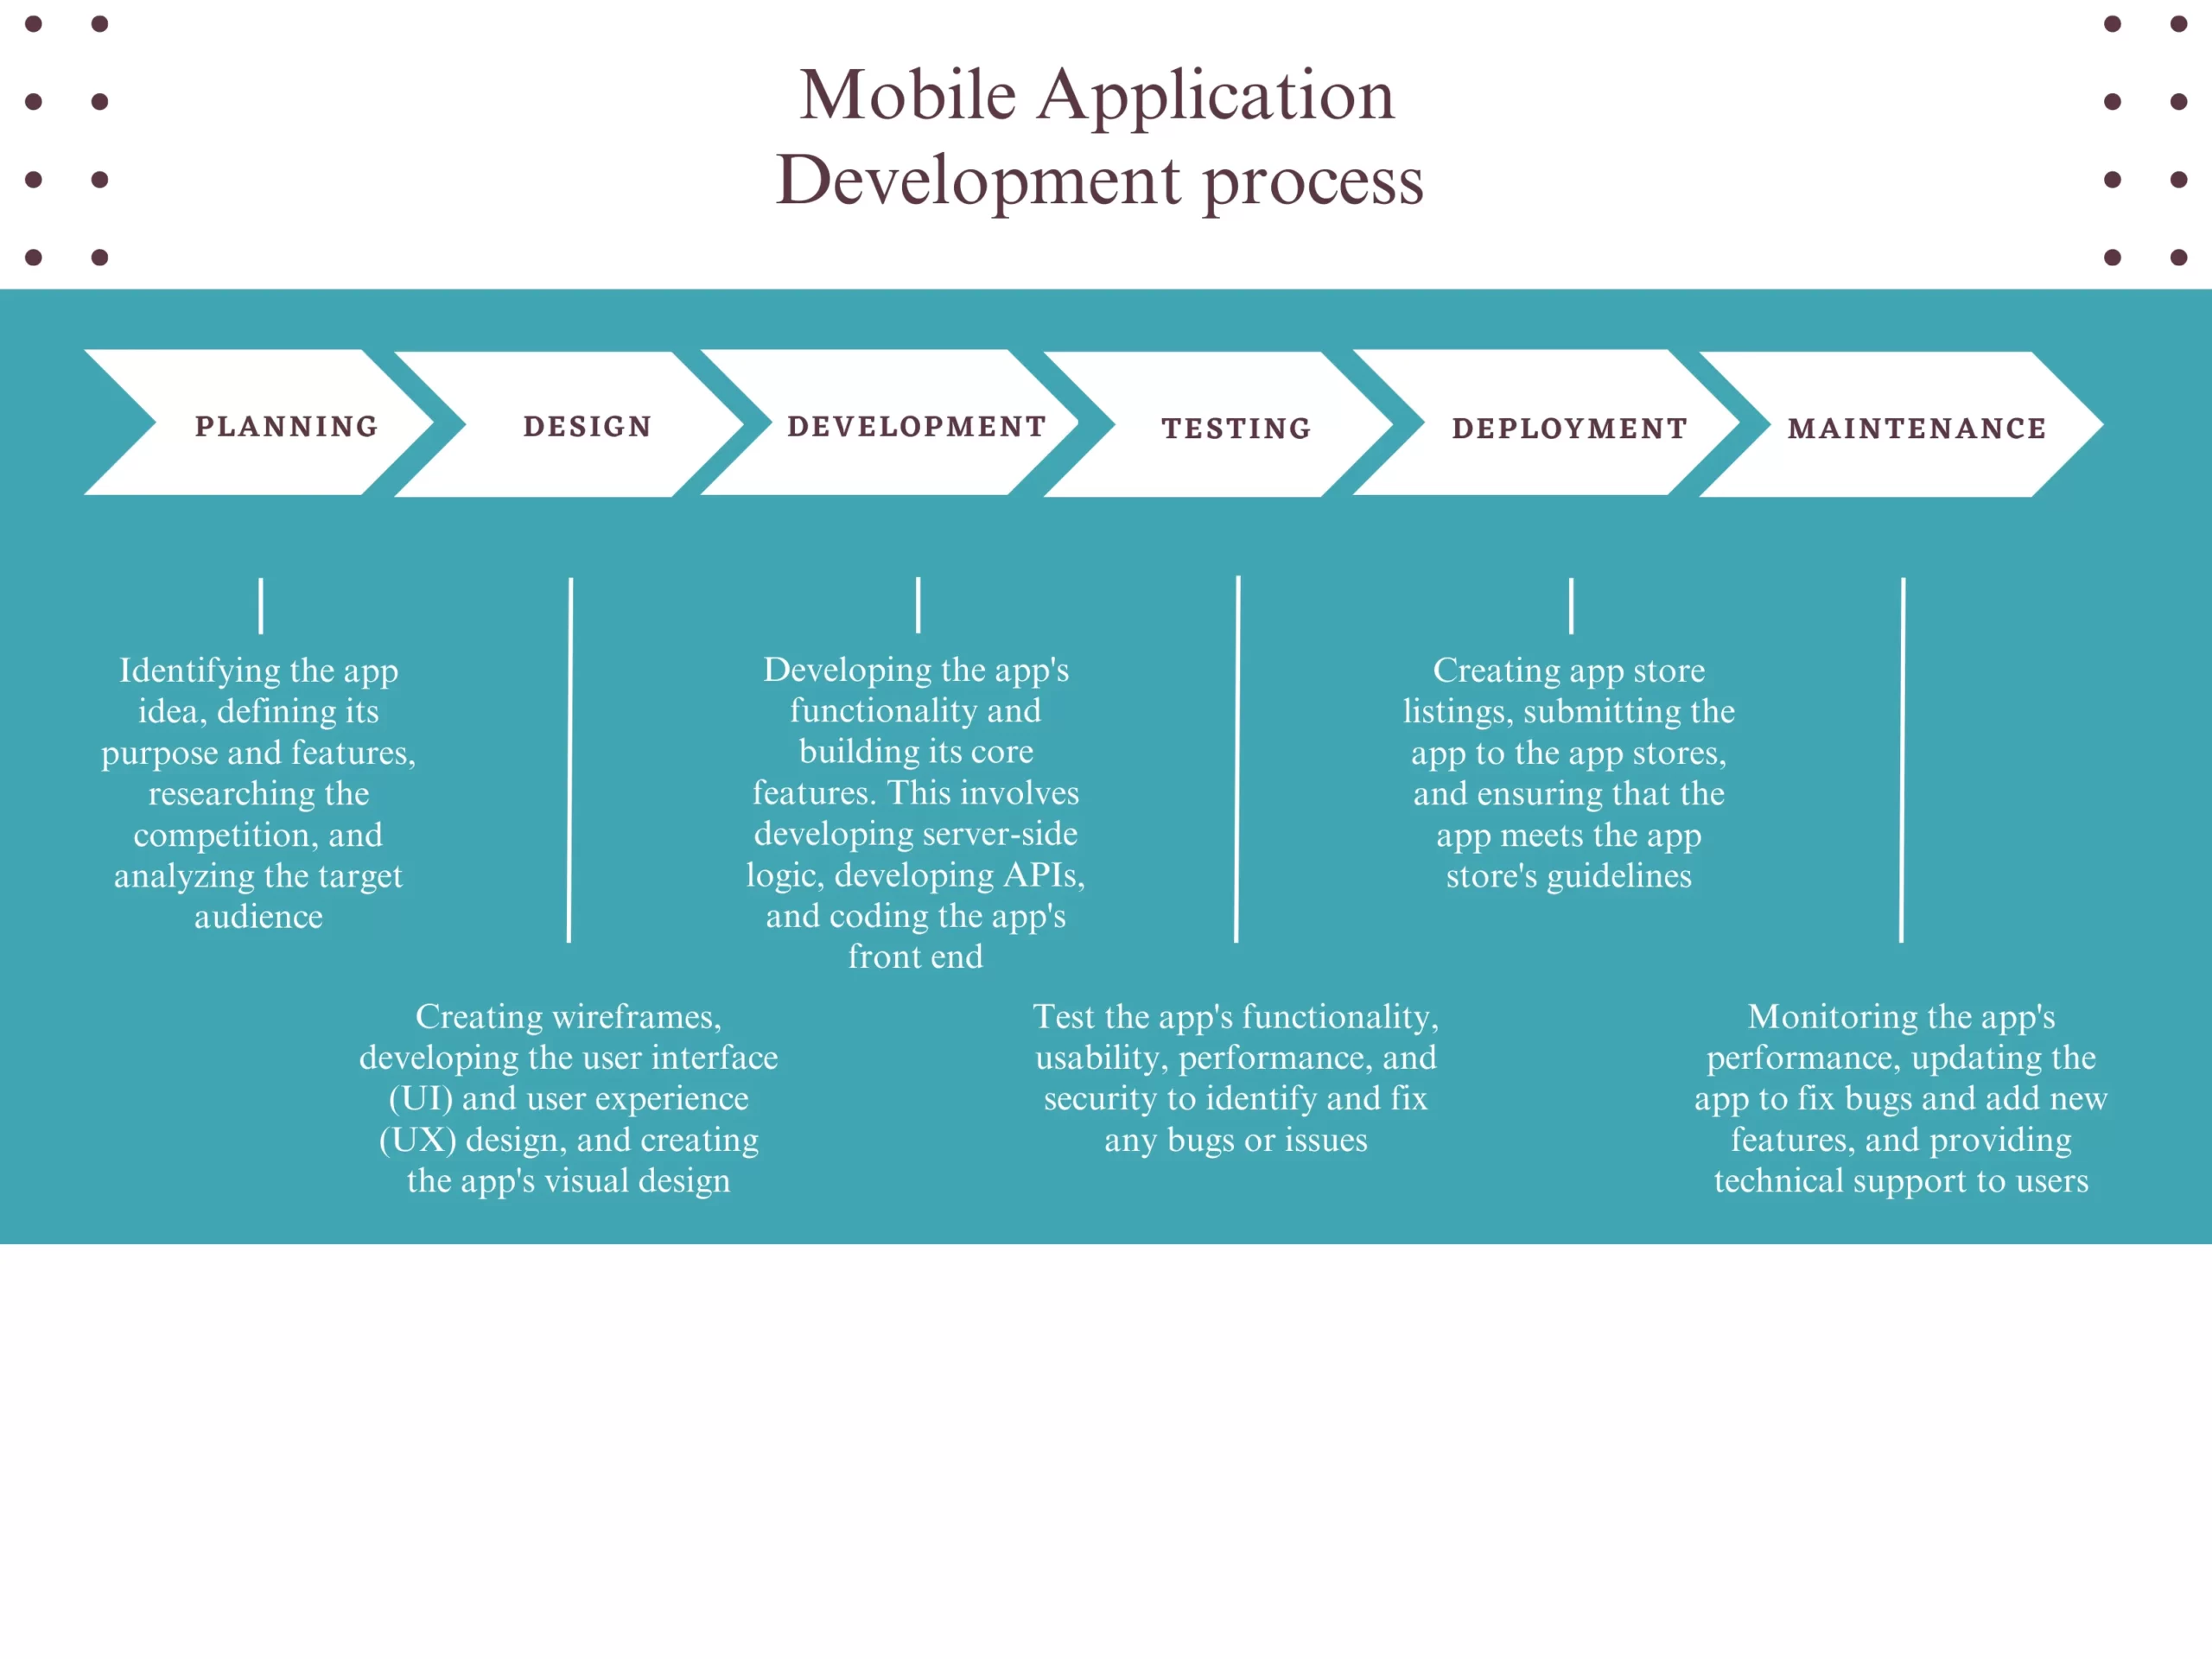 An infographic illustrating the mobile application development process.